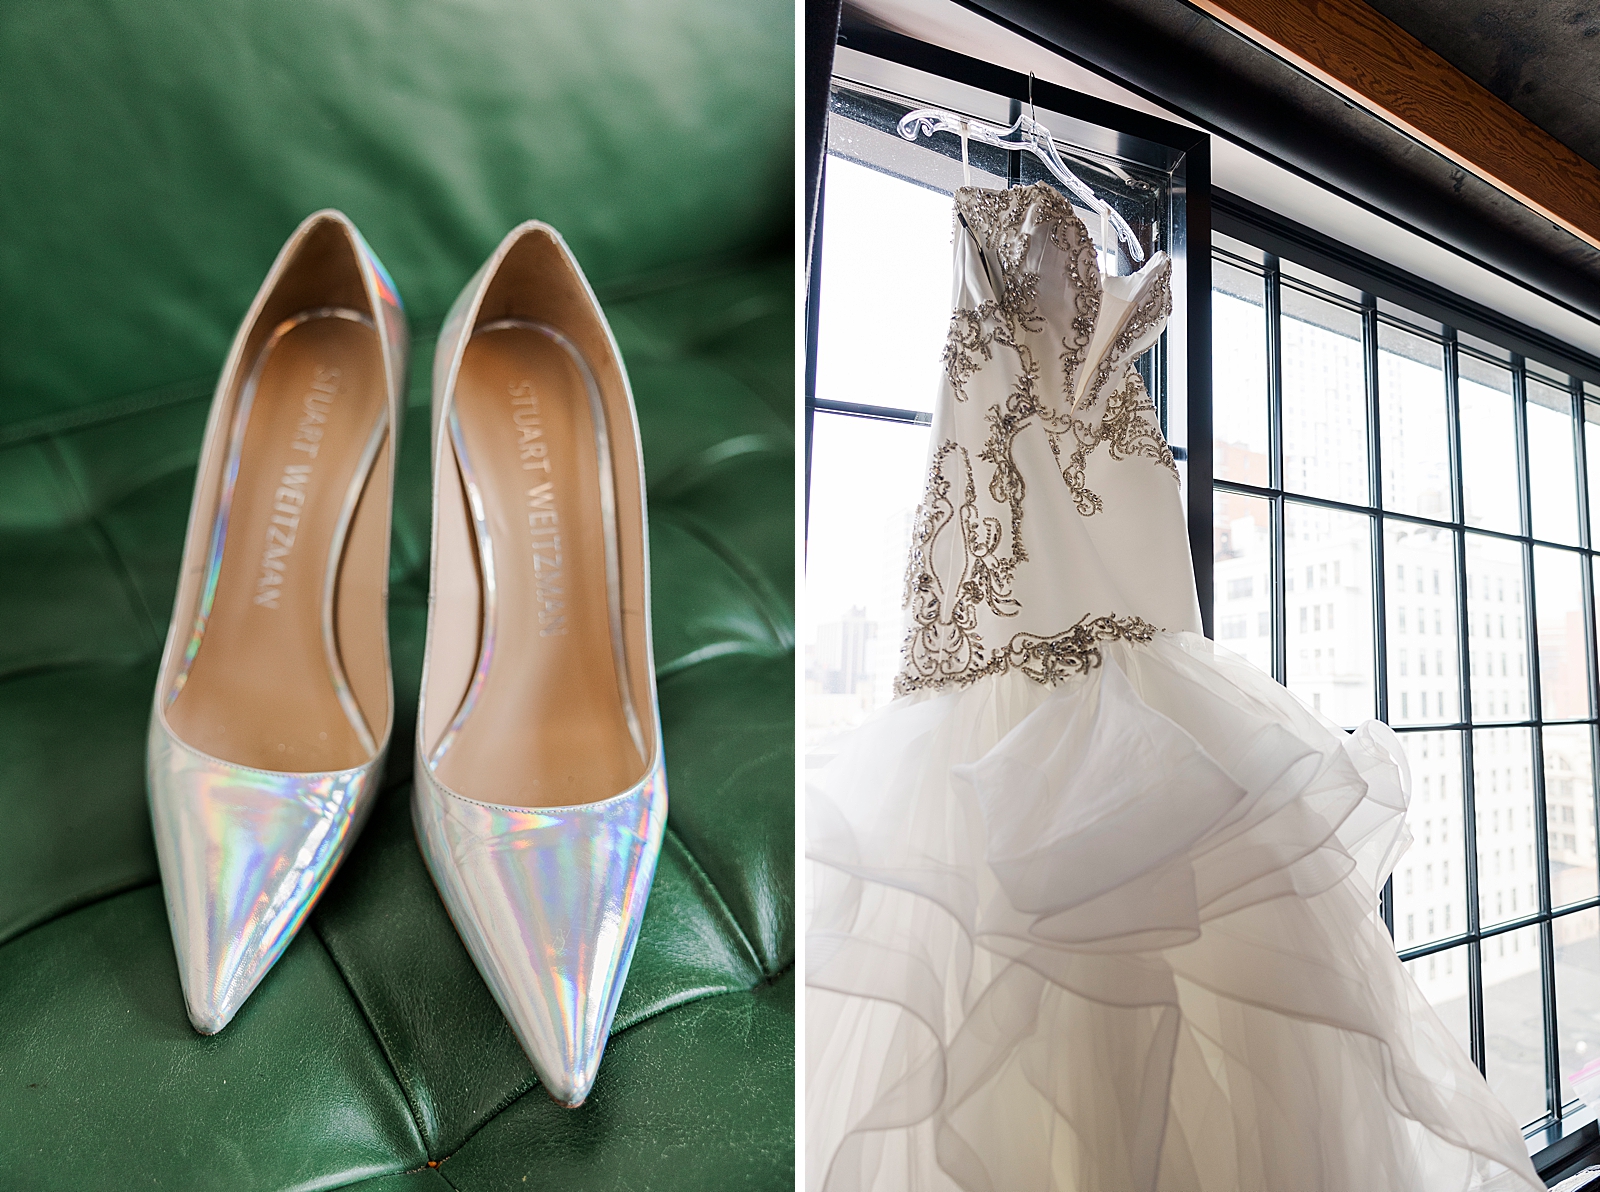 Left photo: Close up shot of the bride's heels. 
Right photo: Close up shot of the bride's wedding dress hanging in front of a large window. 